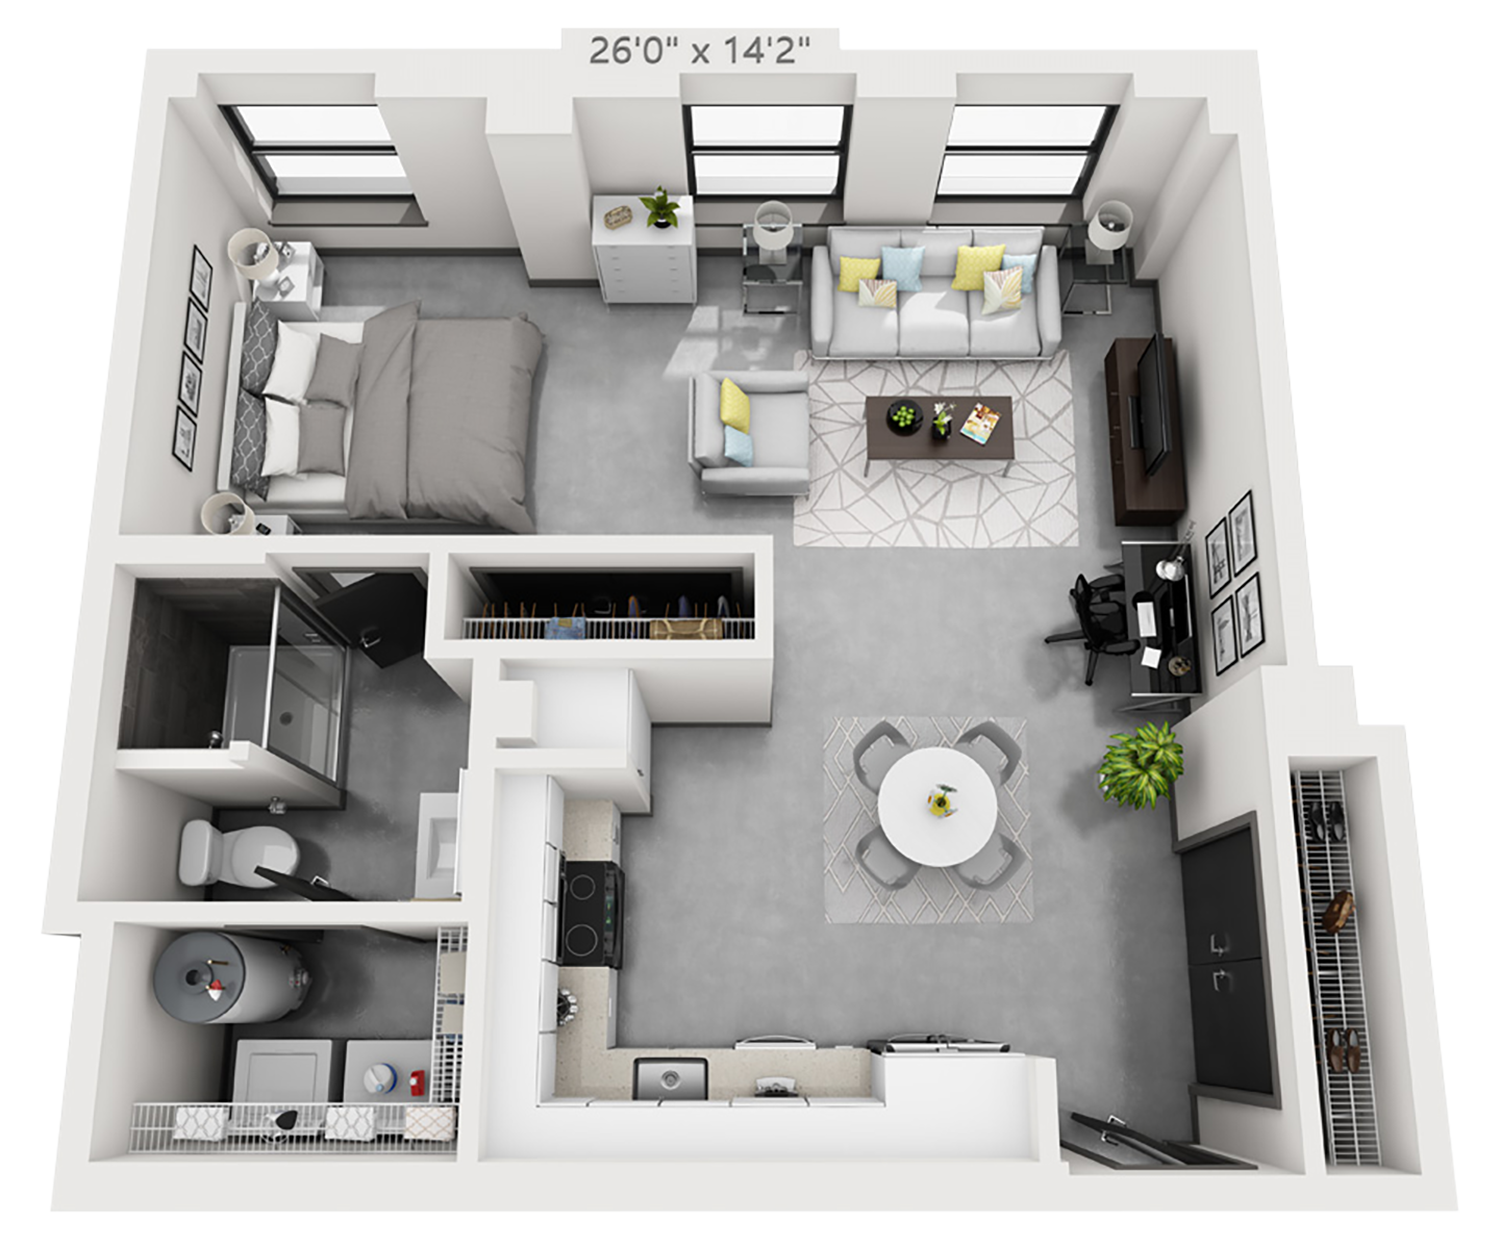 S2 plan is studio bed, 1 bath and 703 square feet